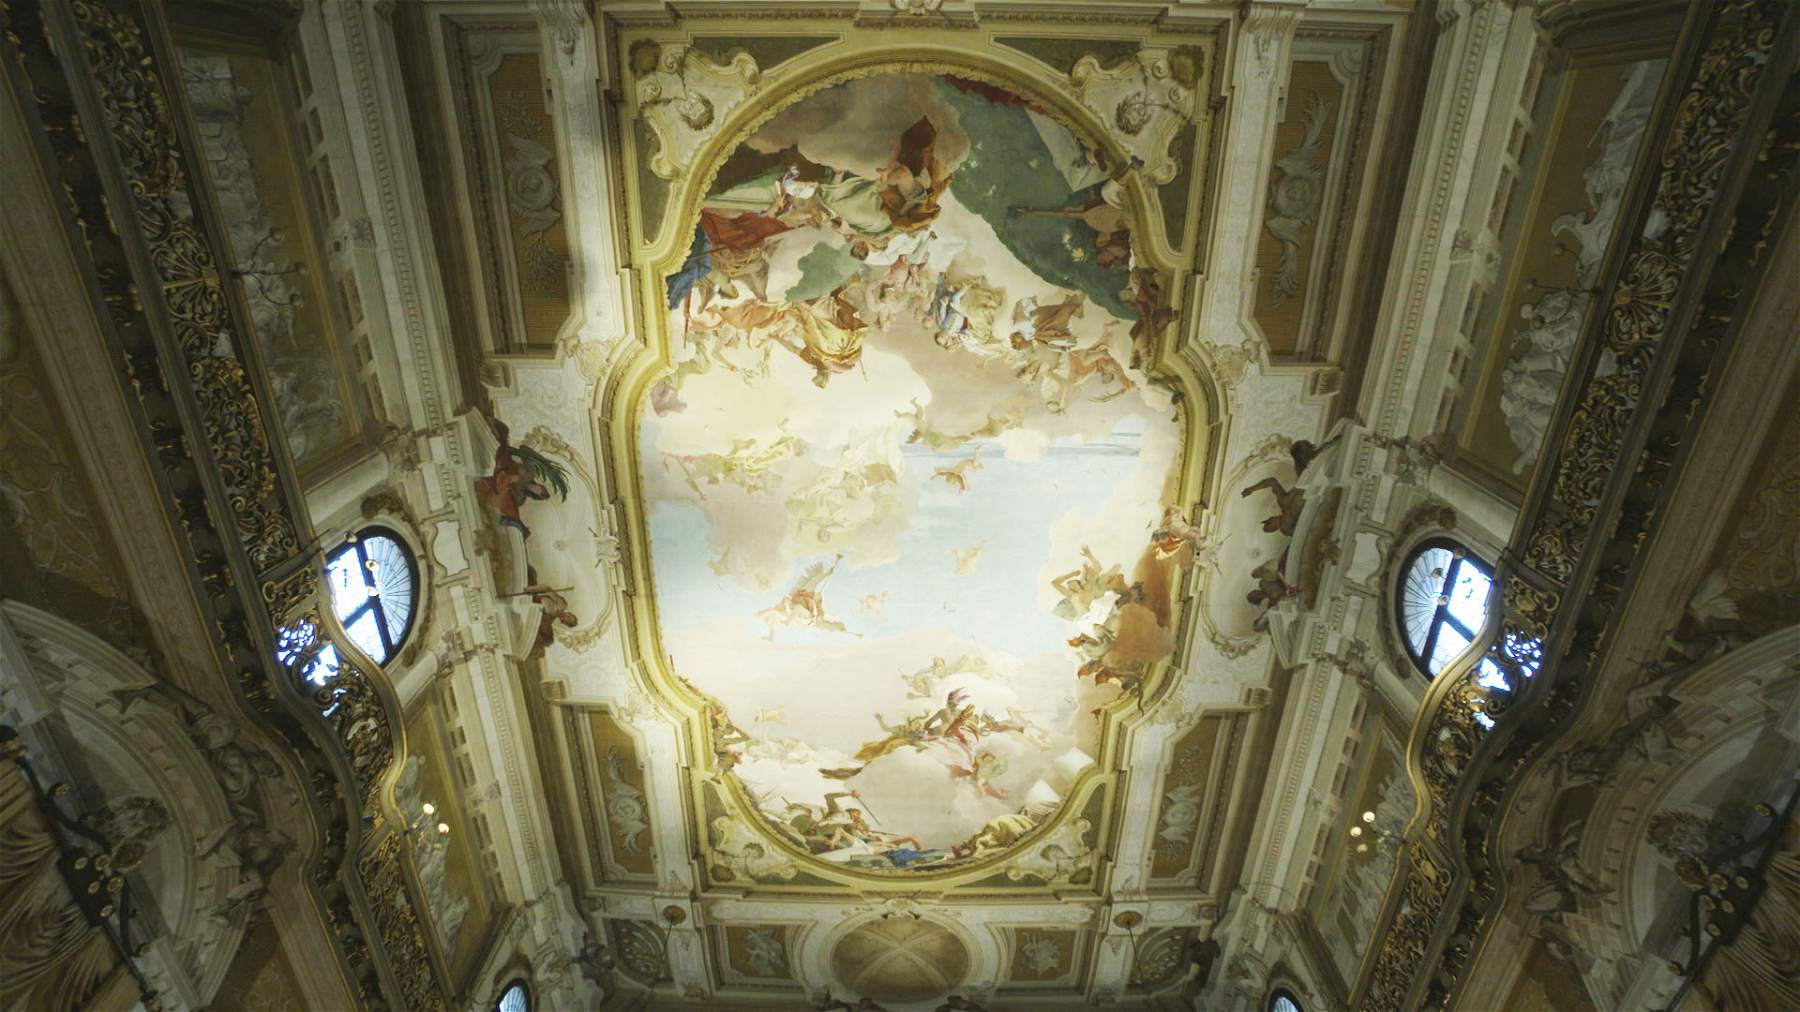 A documentary on Giambattista Tiepolo is coming to Rai5, which will be narrated by Tomaso Montanari